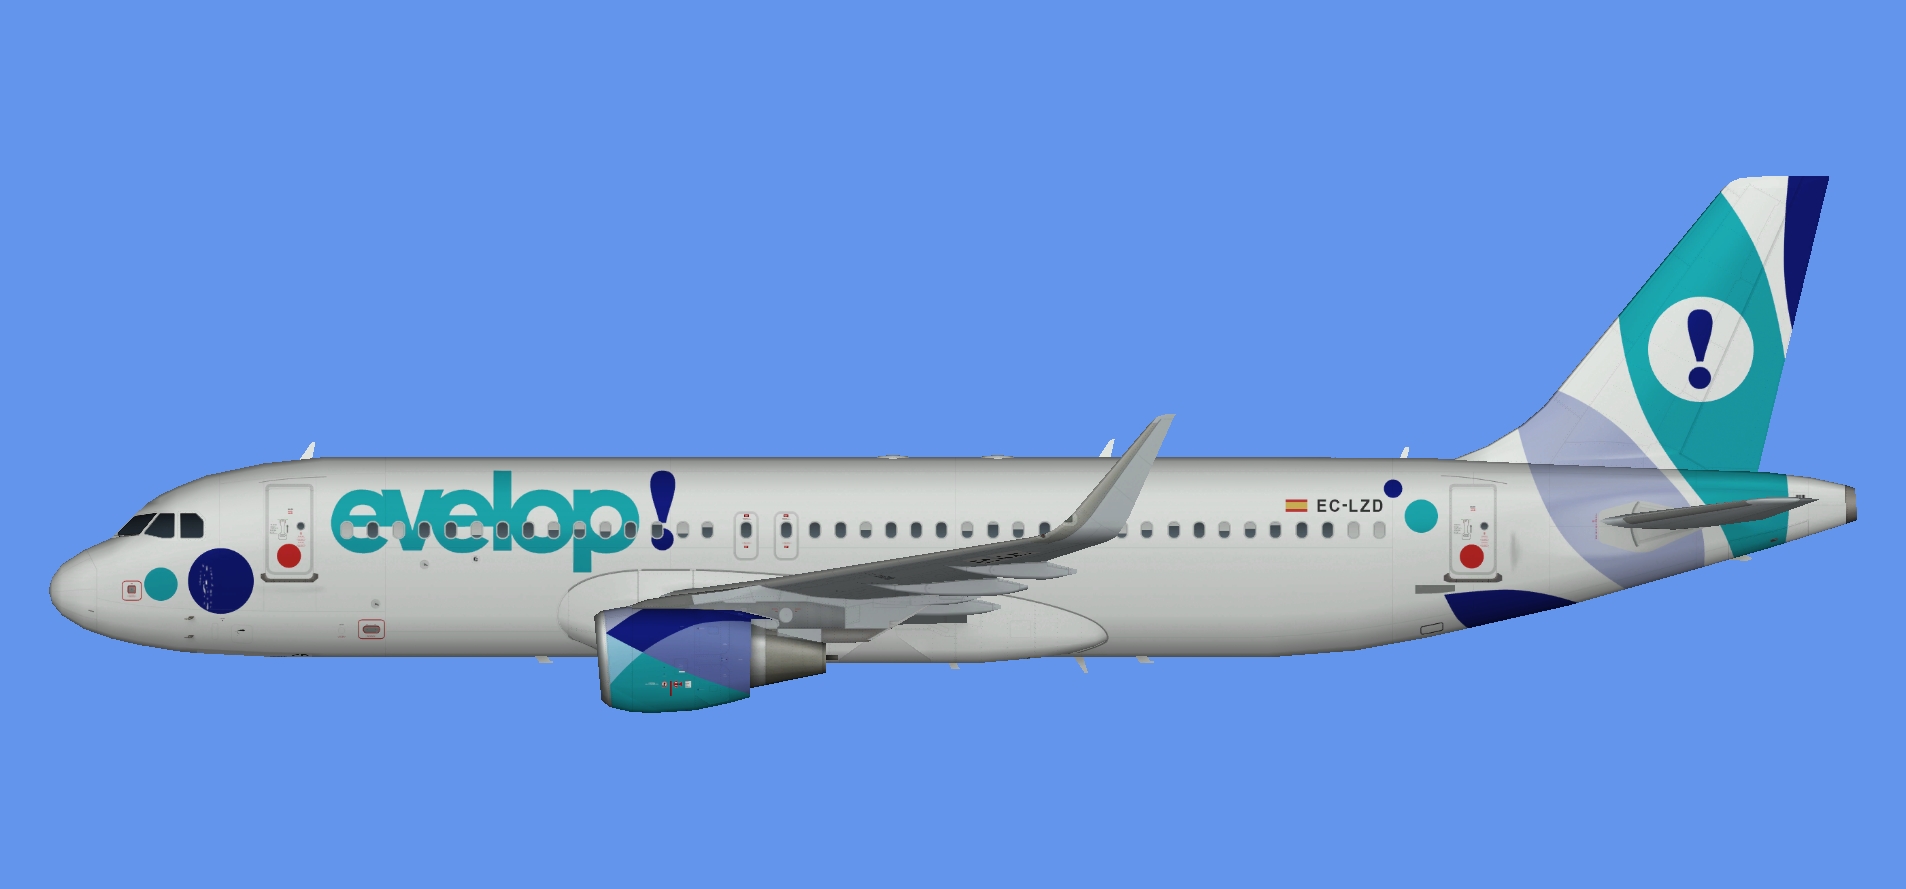 Evelop Airlines Airbus A320